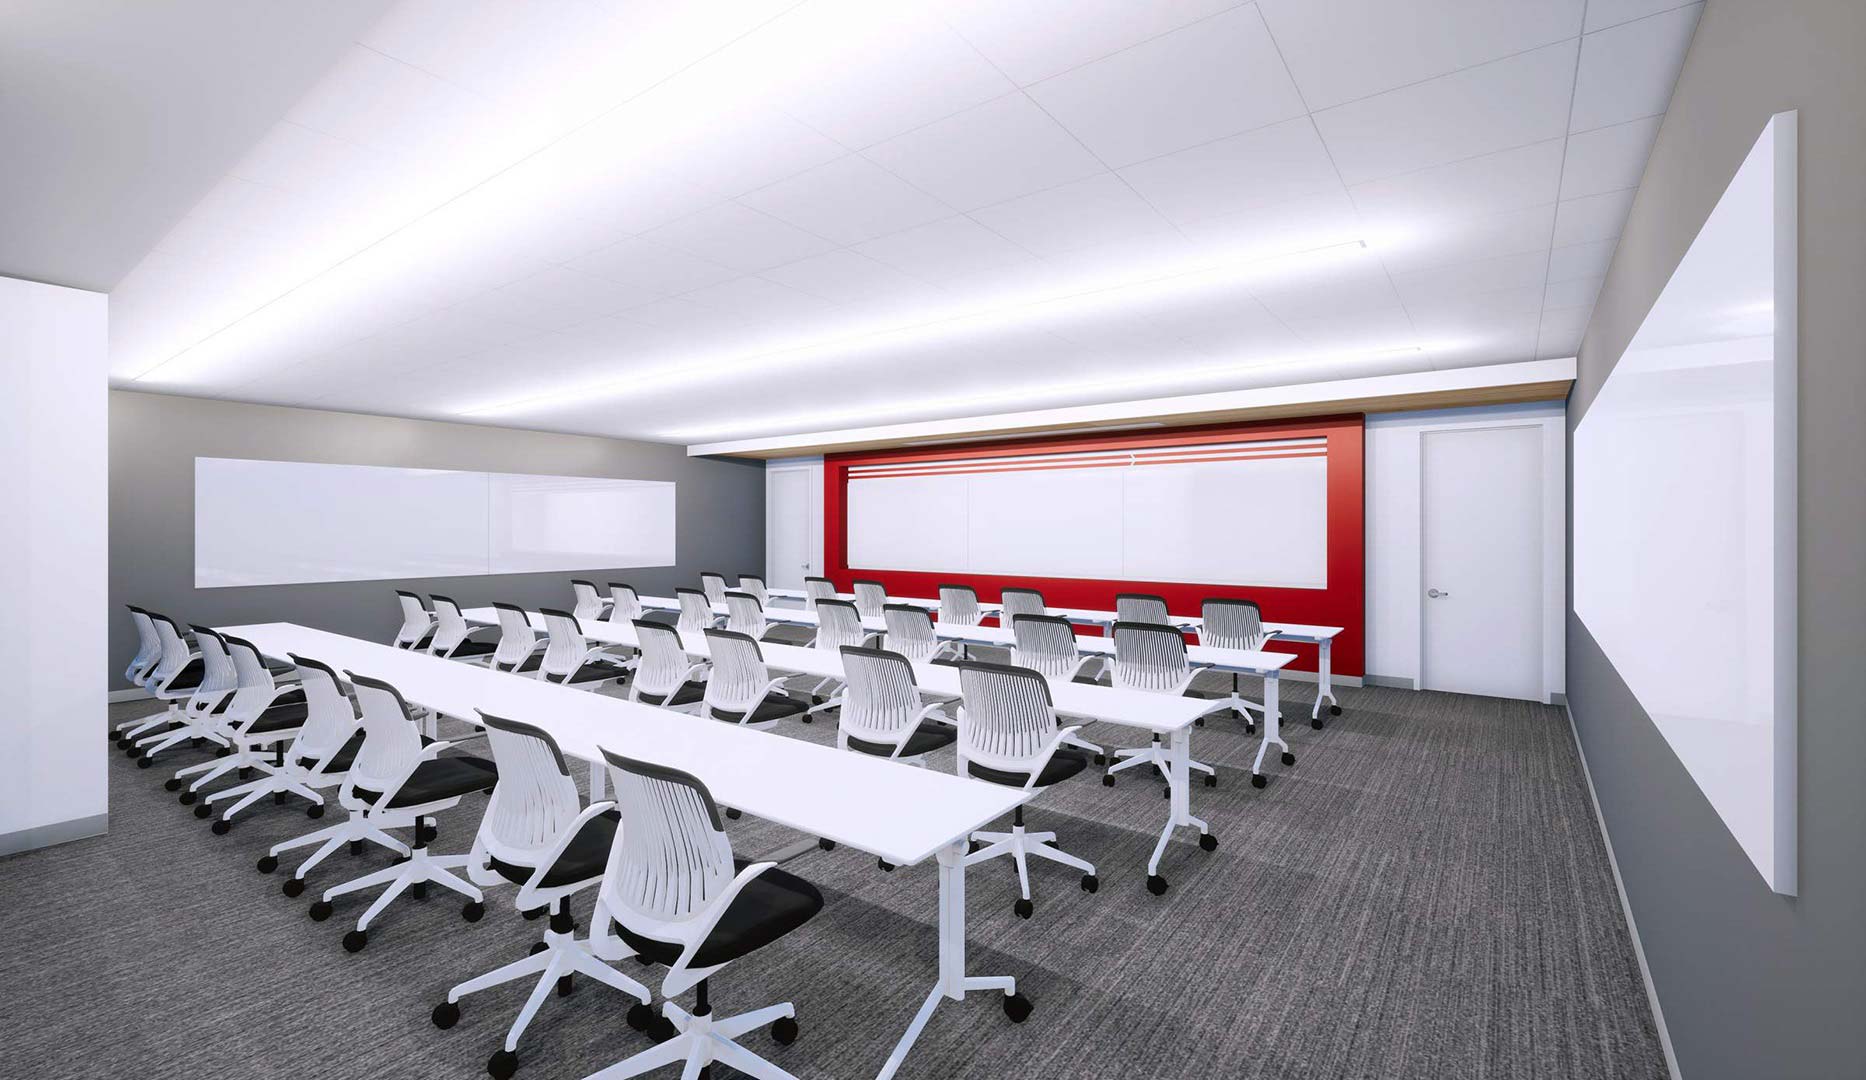 A rendering view of a team meeting room with white boards at the front, 4 rows of long tables with white and black office chairs.